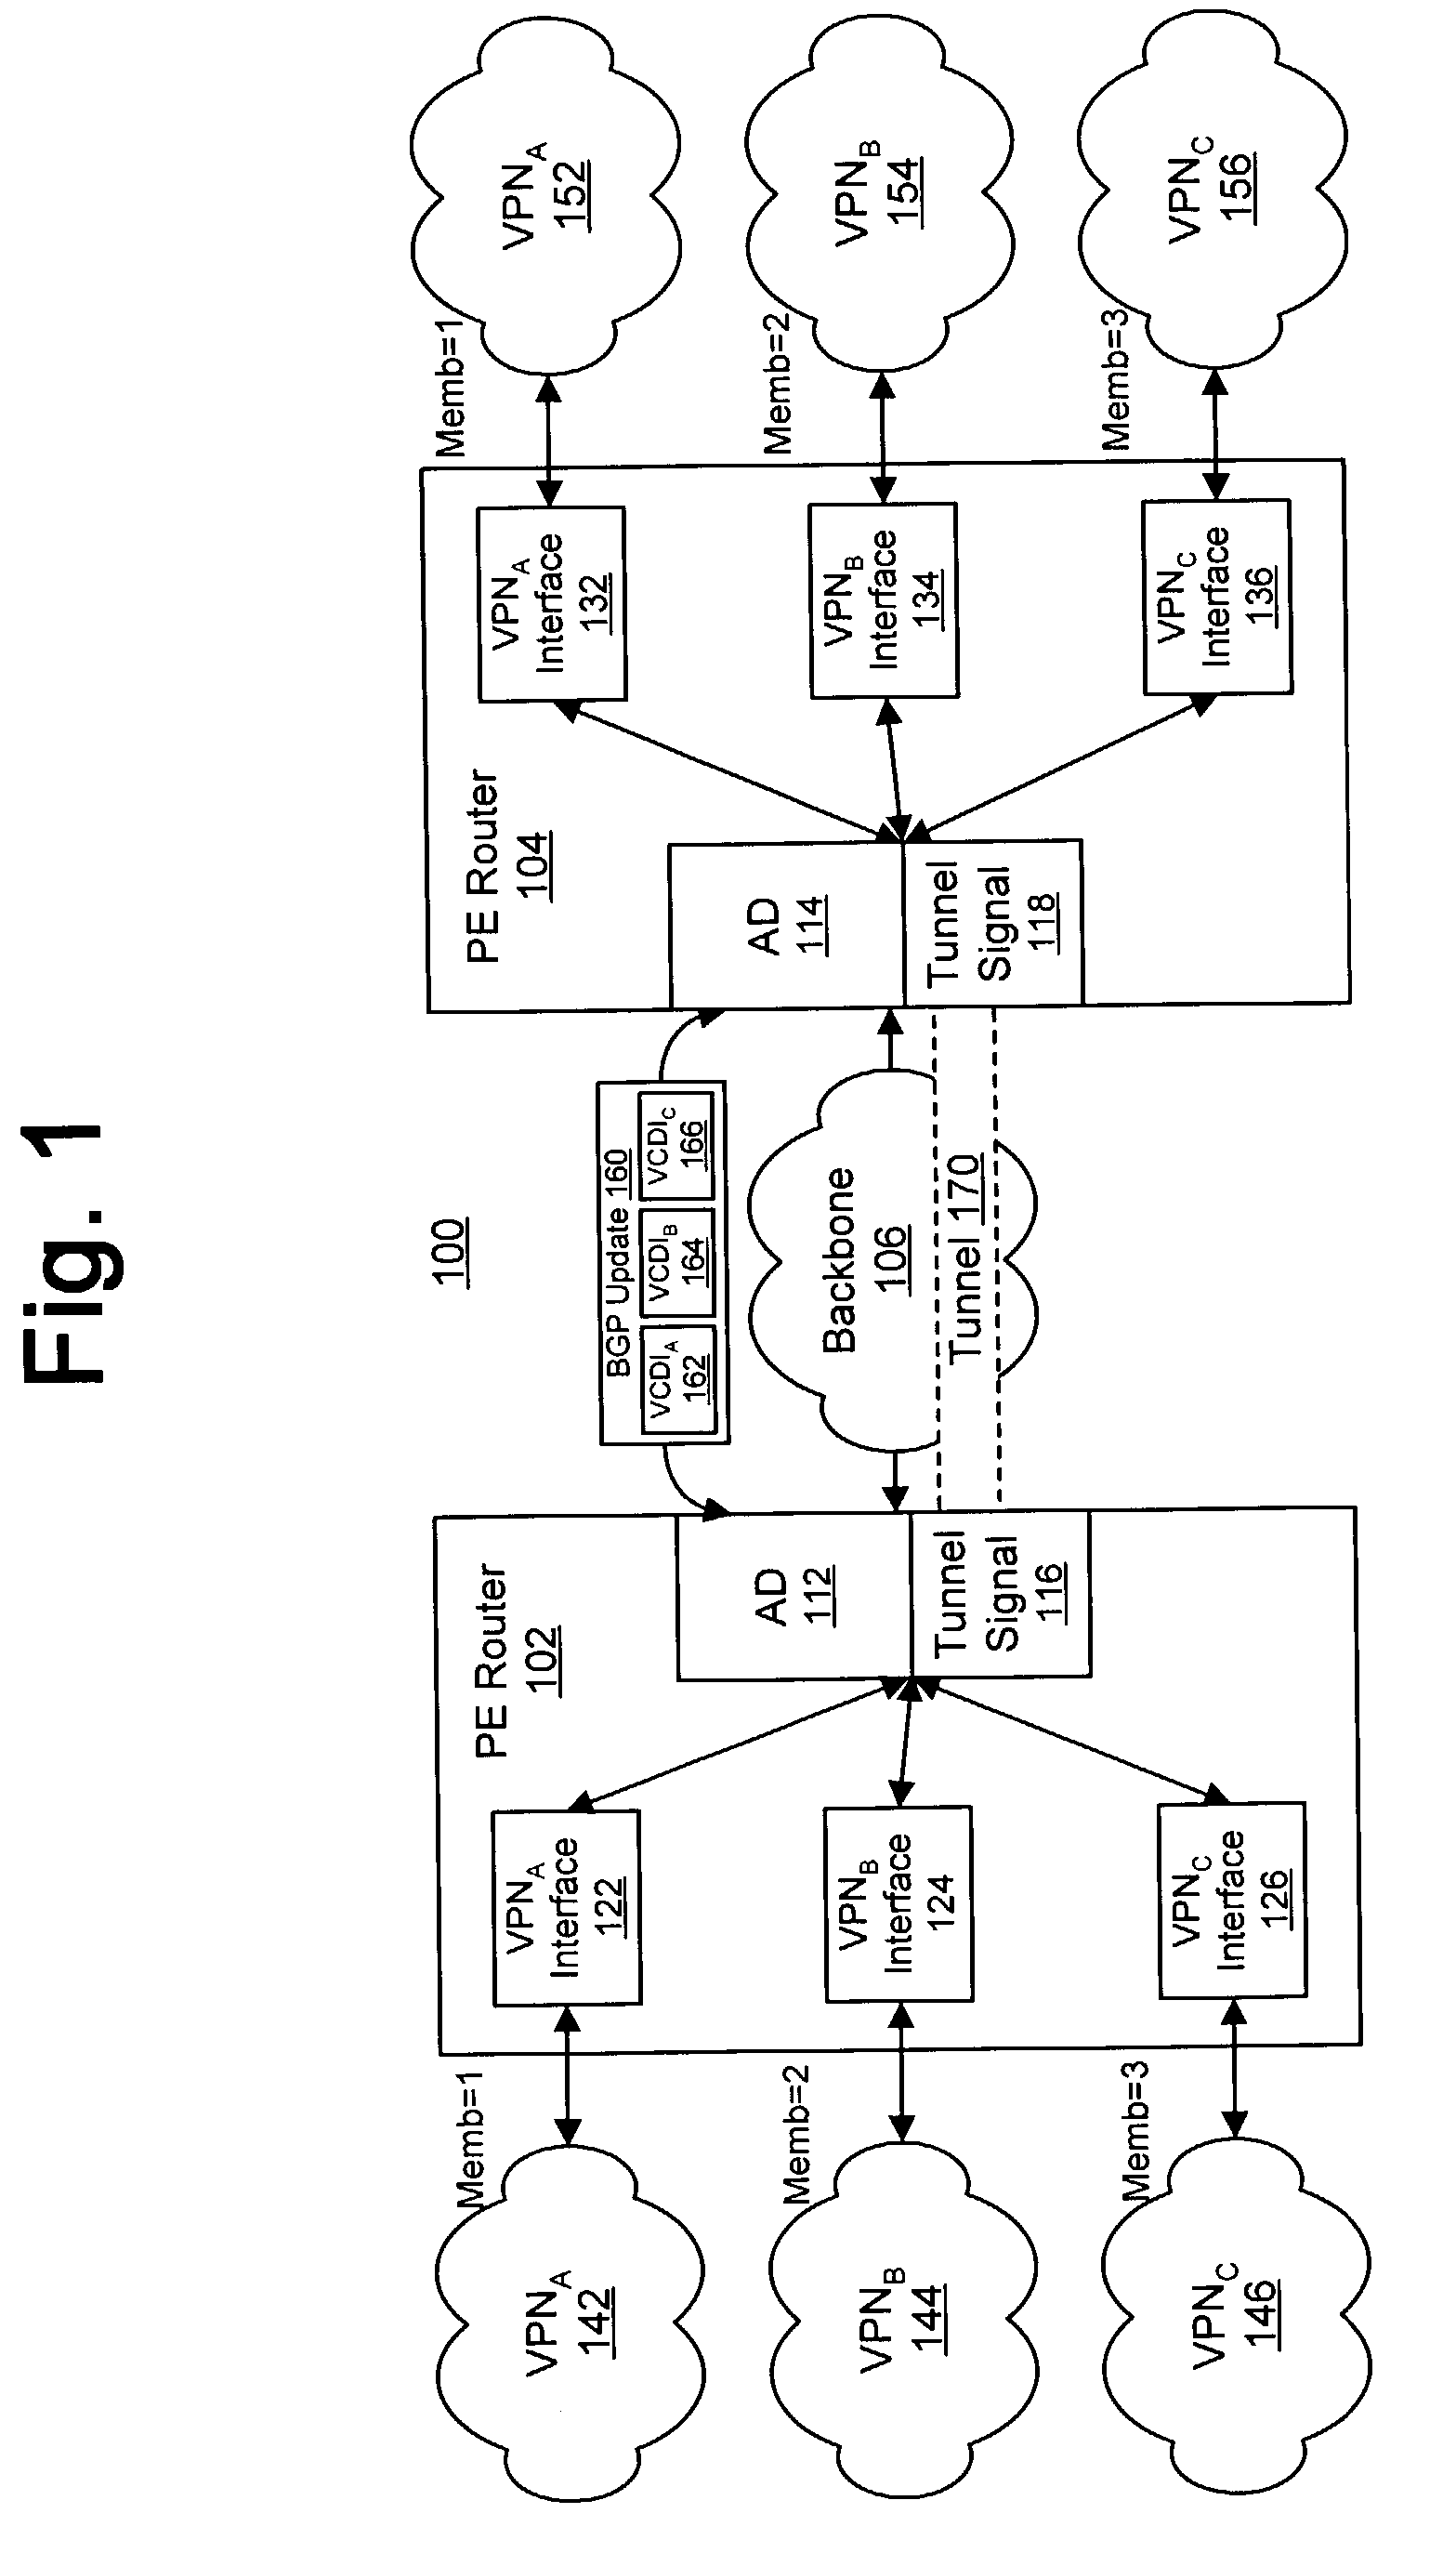 Resource allocation using an auto-discovery mechanism for provider-provisioned layer-2 and layer-3 virtual private networks